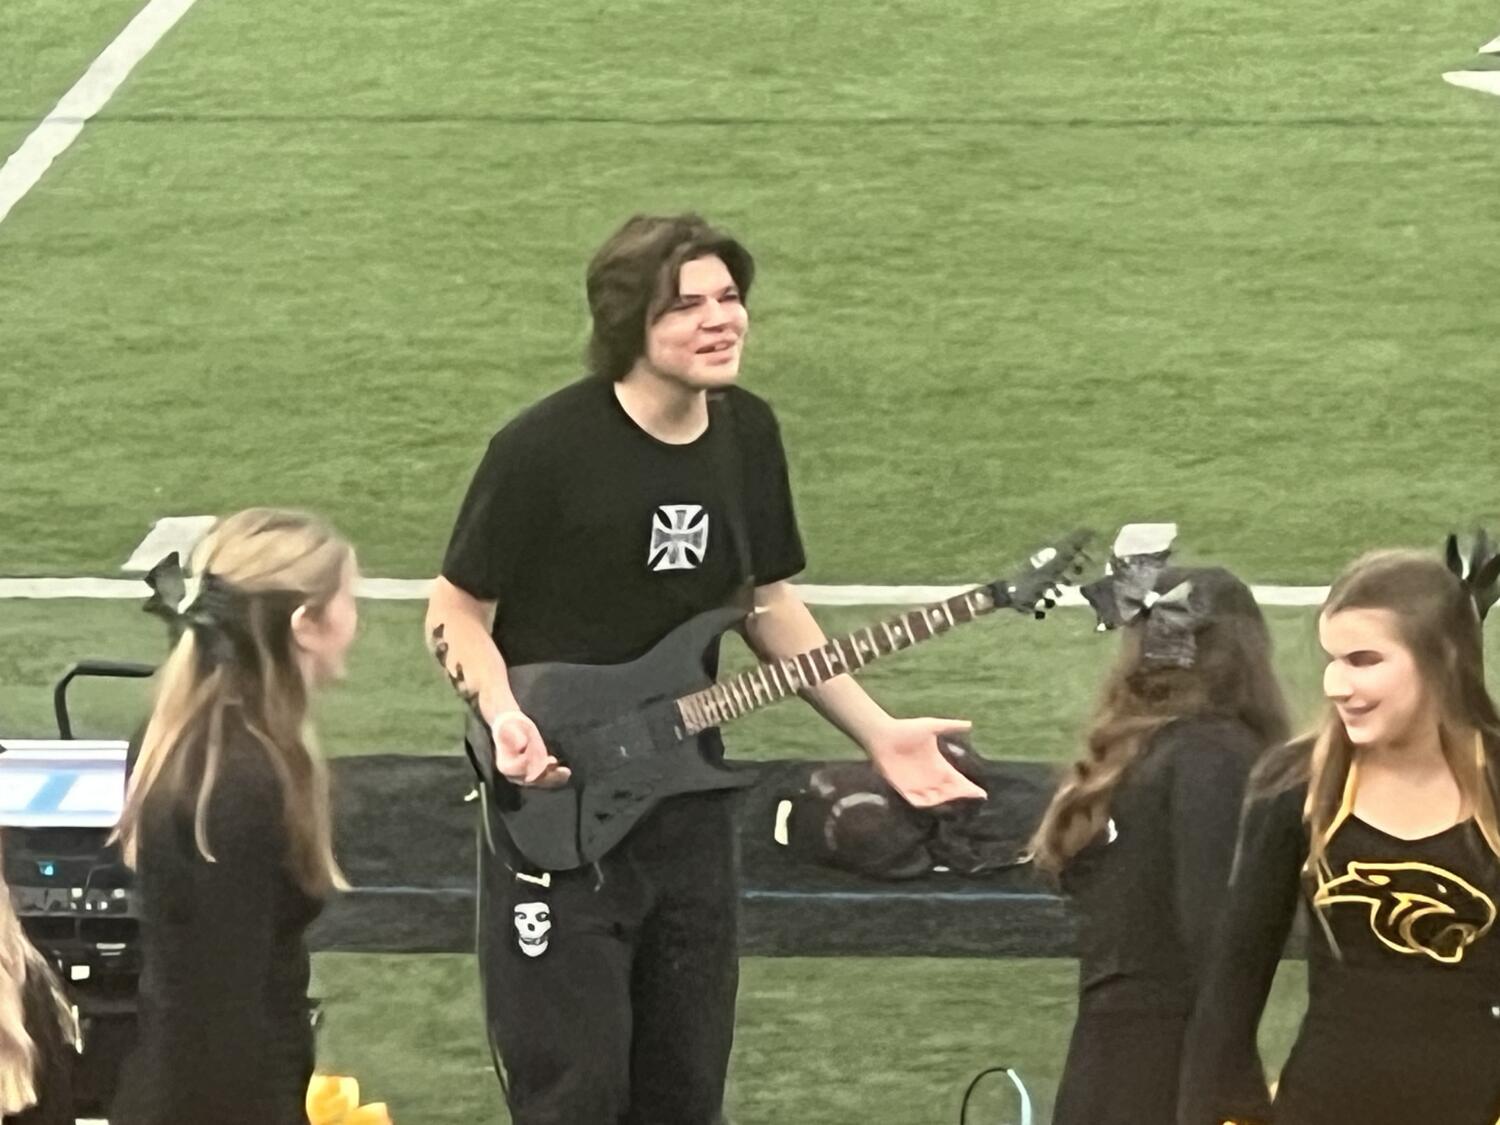 Newbury Park student, self-taught at guitar, comes through with electric anthem performance